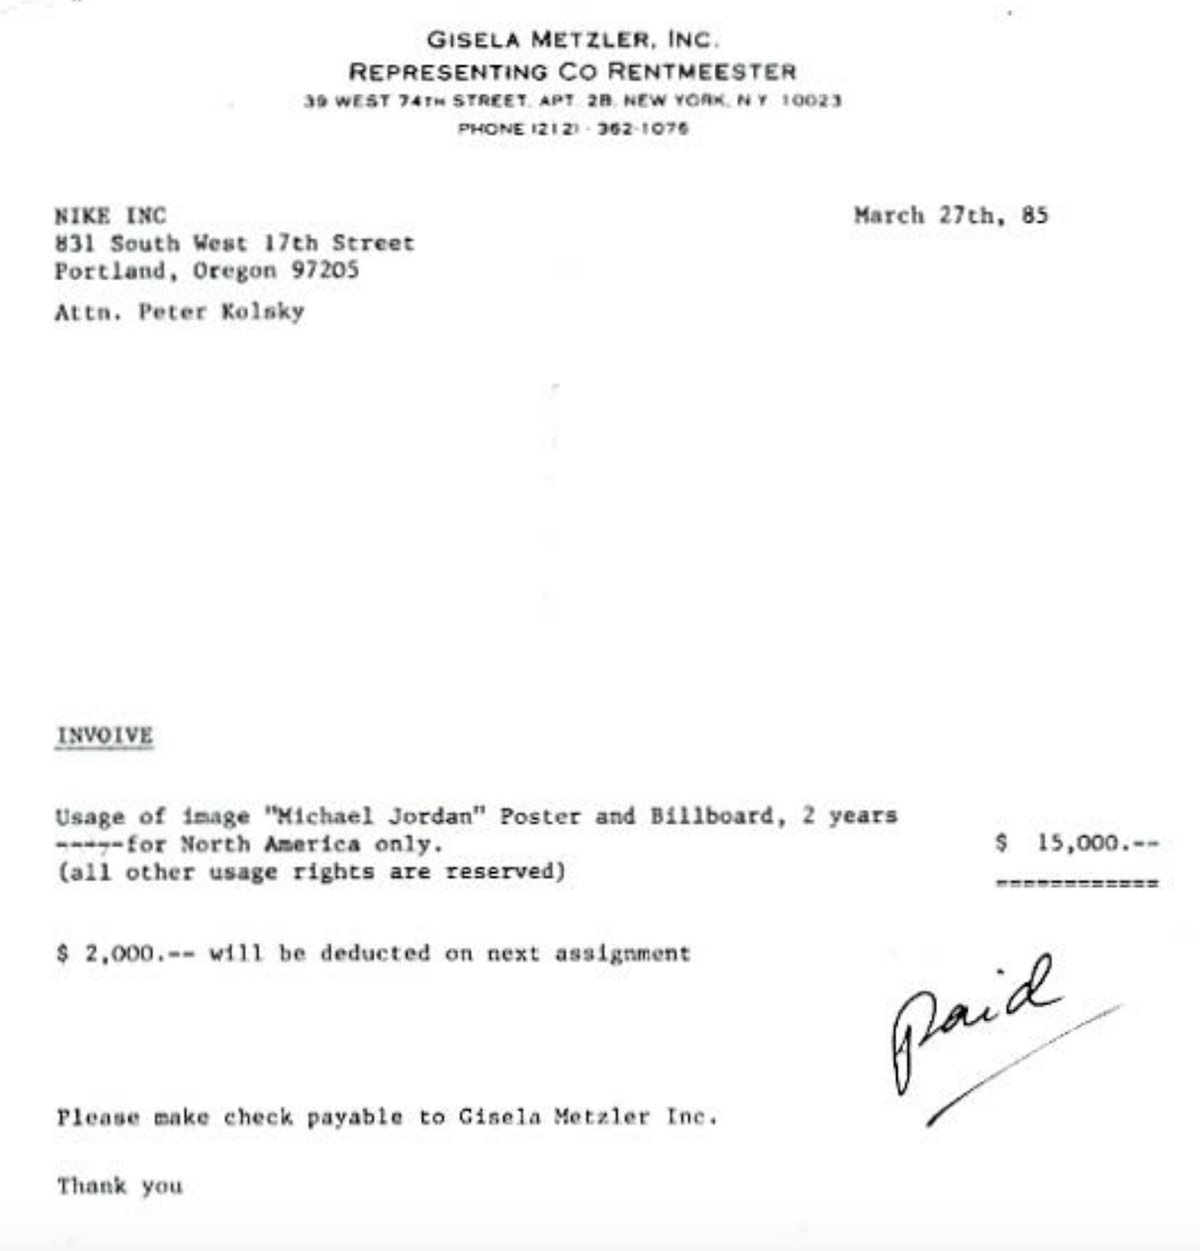 Michael Jordan photo invoice for $15,000 dated March 27, 1985